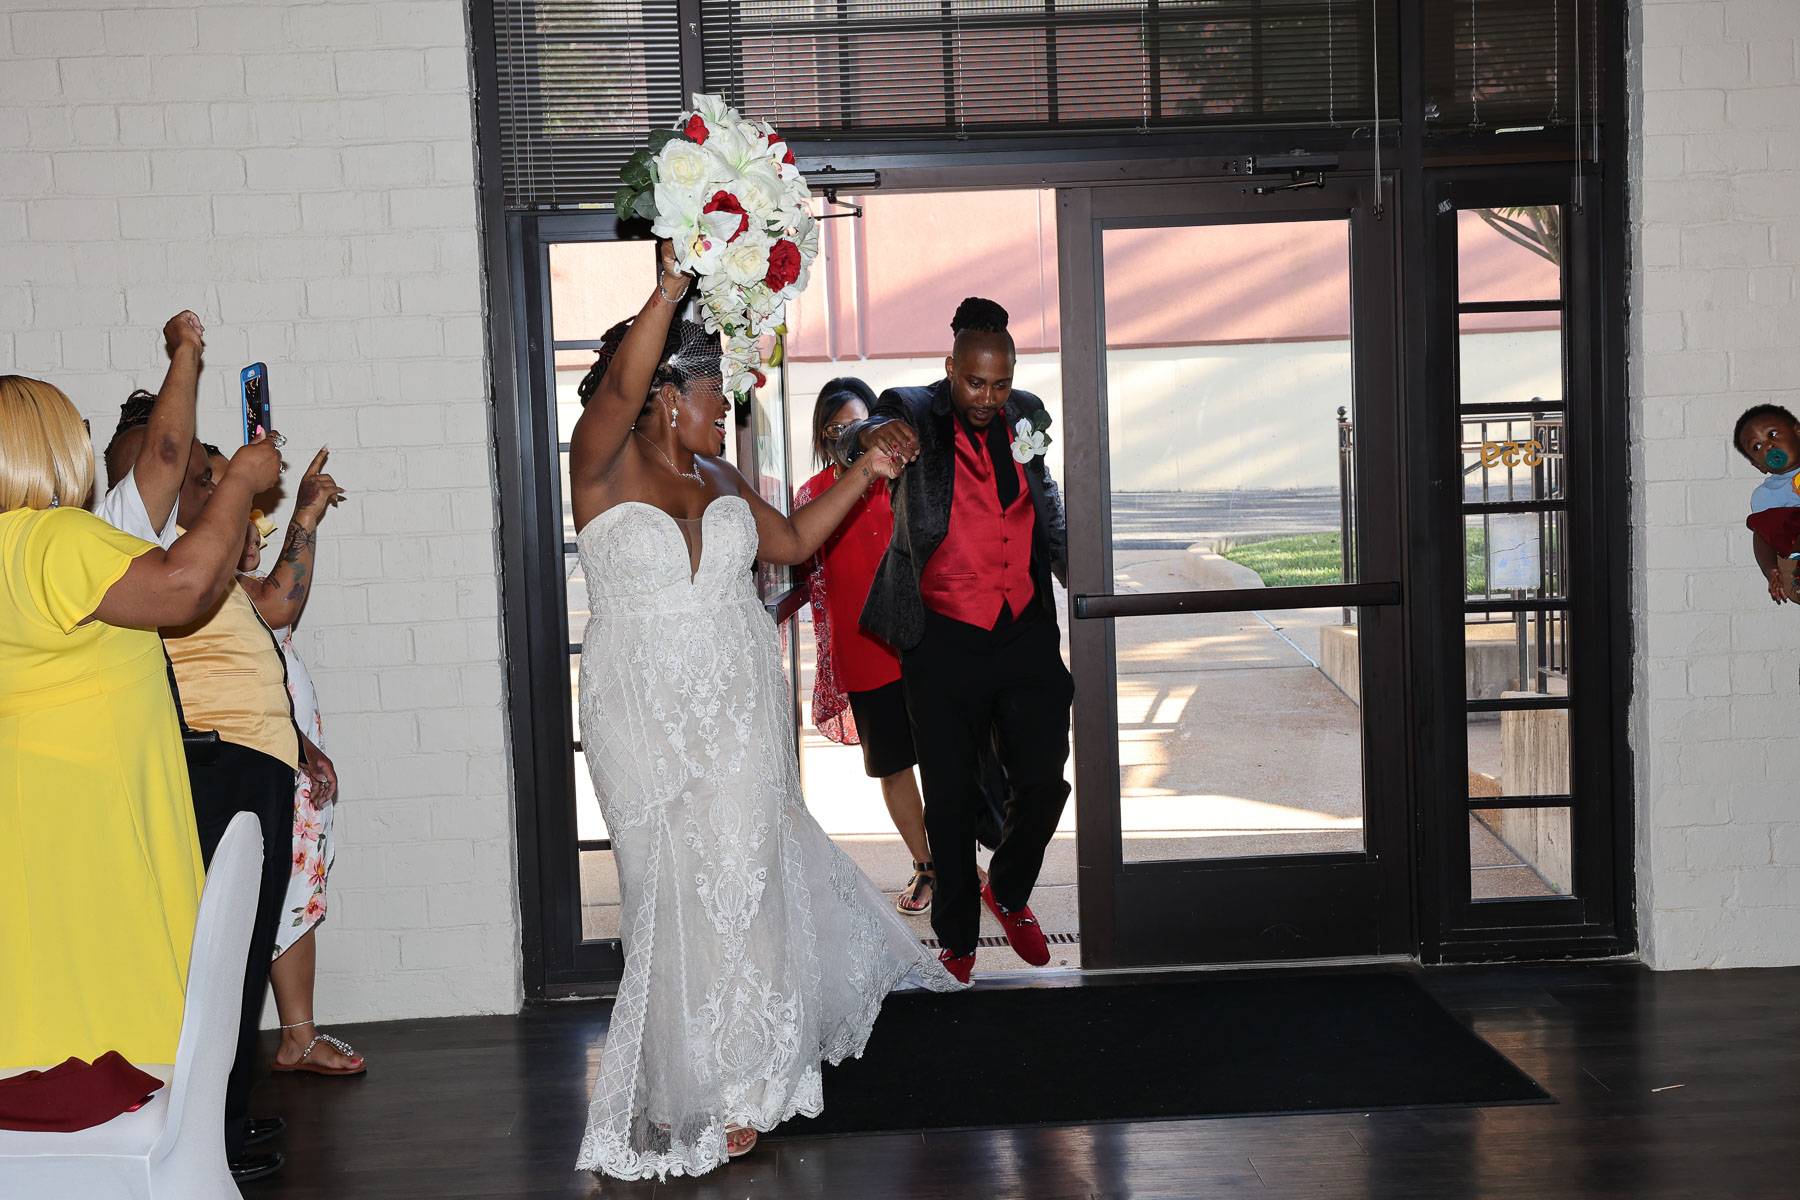 The bride leading the groom to the door